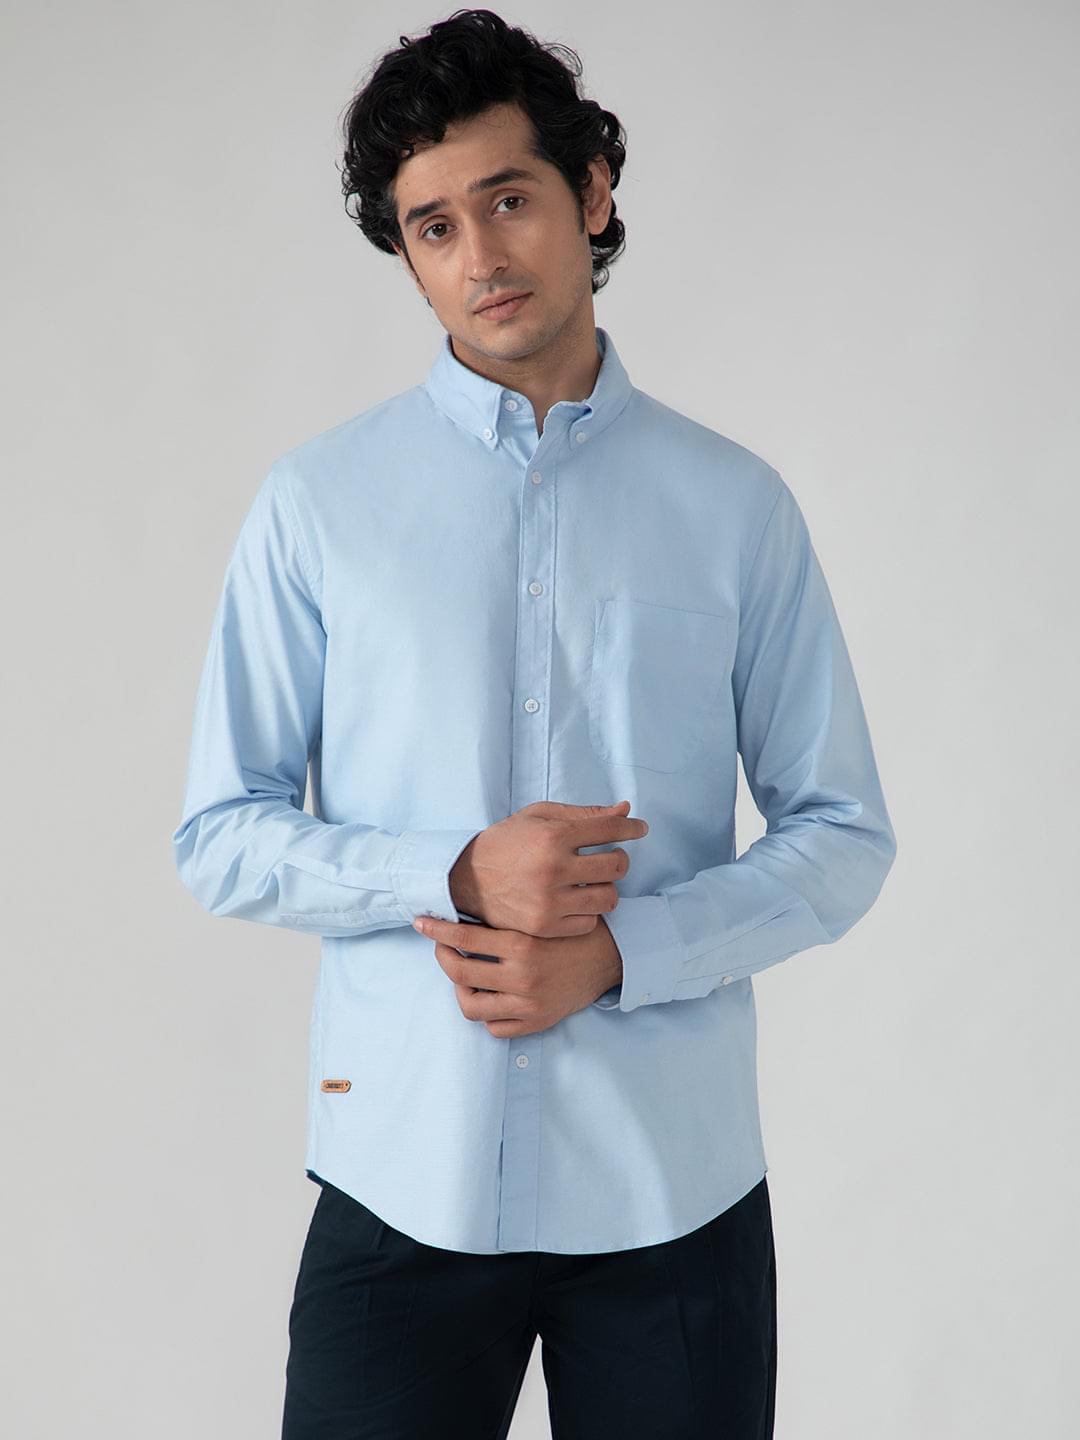 2 Way Stretch Oxford Shirt in Sky Blue- Comfort Fit